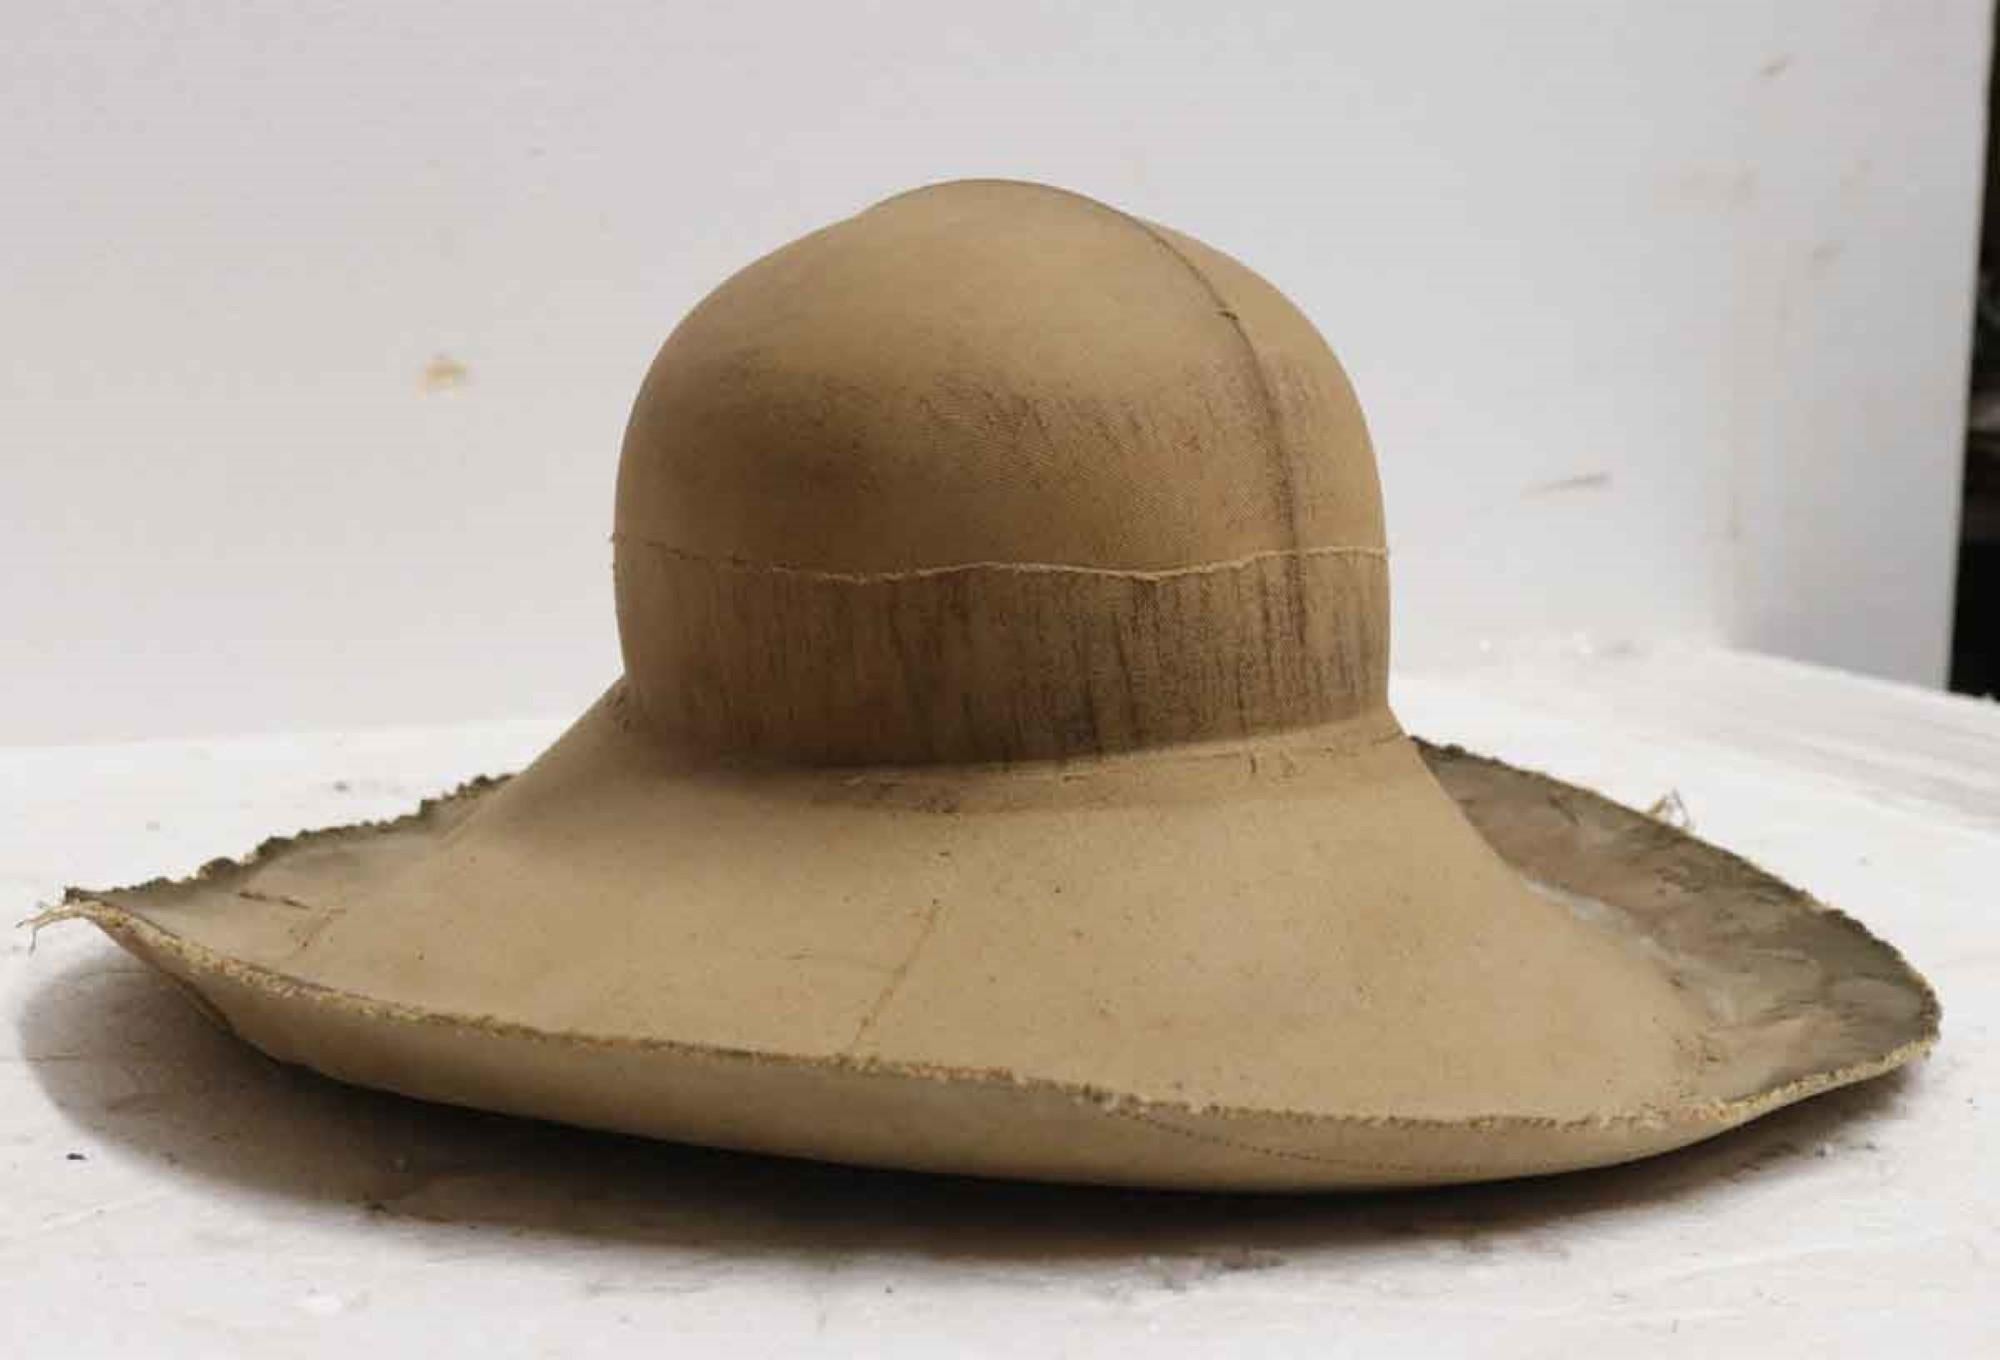 1890s antique French hat mold made of lacquered canvas. Signed on the bottom. This can be seen at our 302 Bowery location in NoHo in Manhattan.